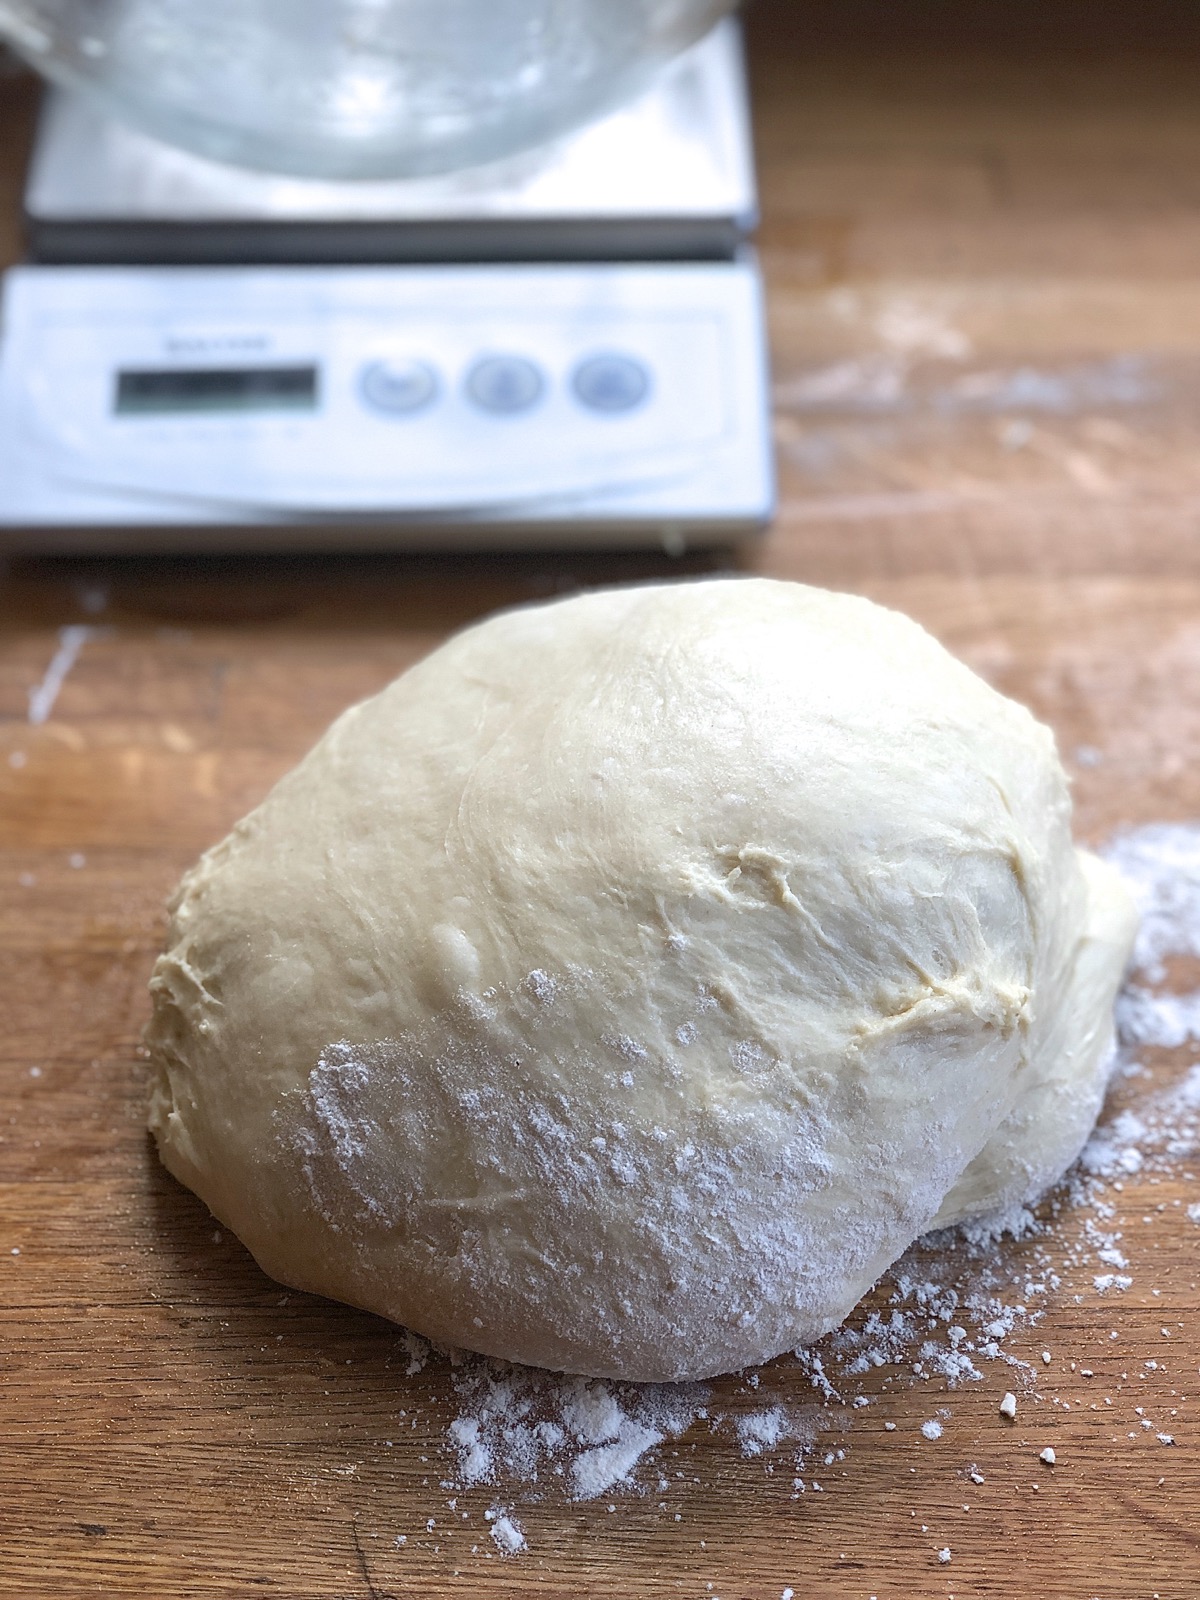 Kneaded dough for Amish Dinner Rolls on a lightly floured work surface.